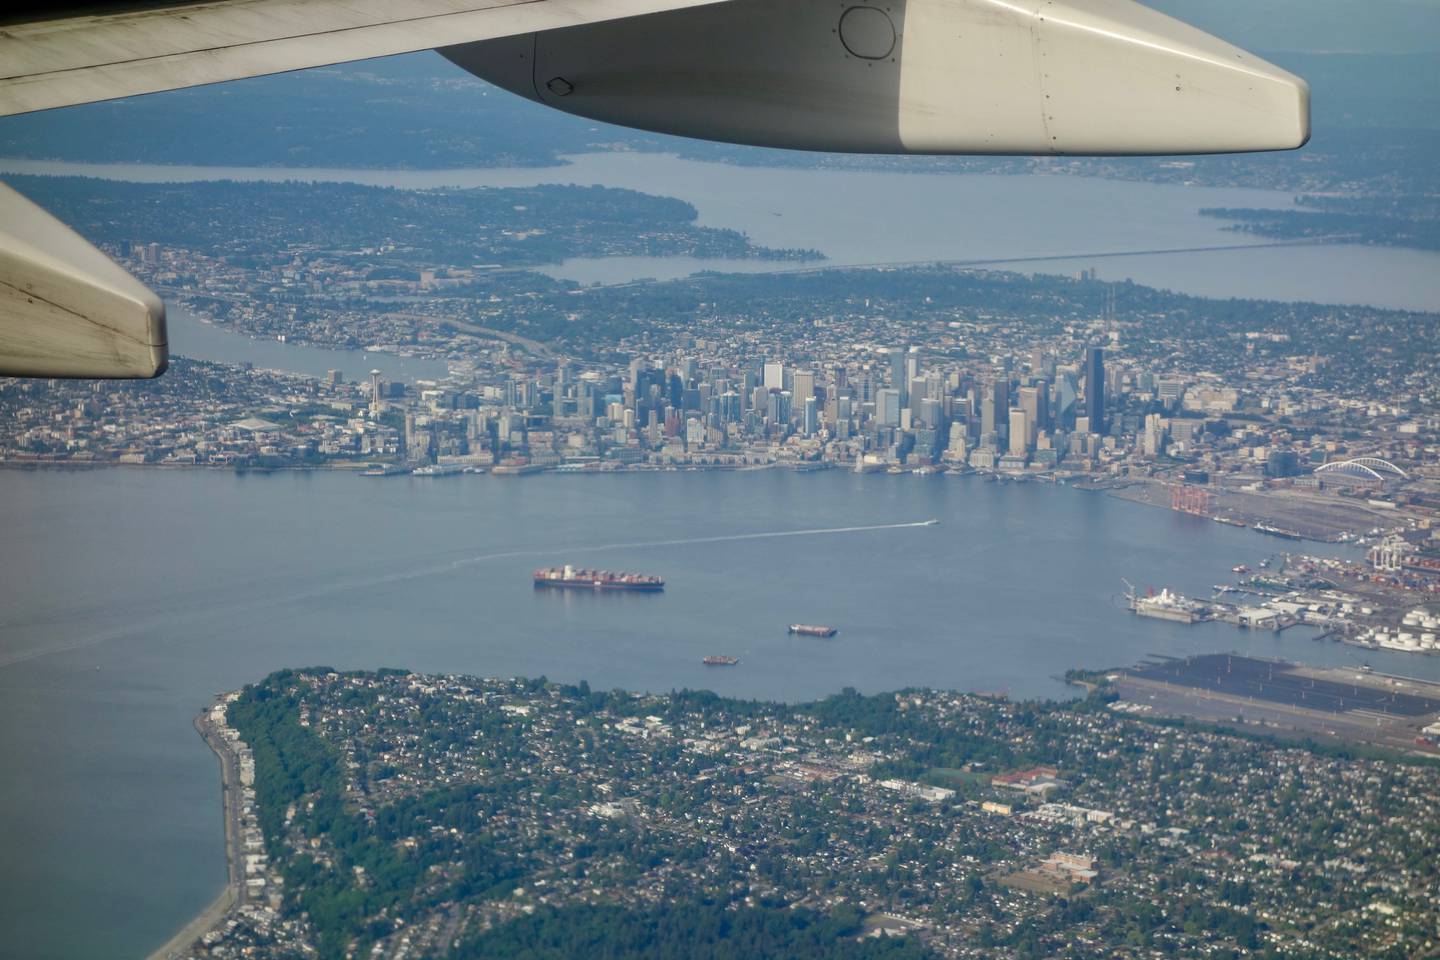 Seattle, as seen from the window seat of a New York to Seattle flight